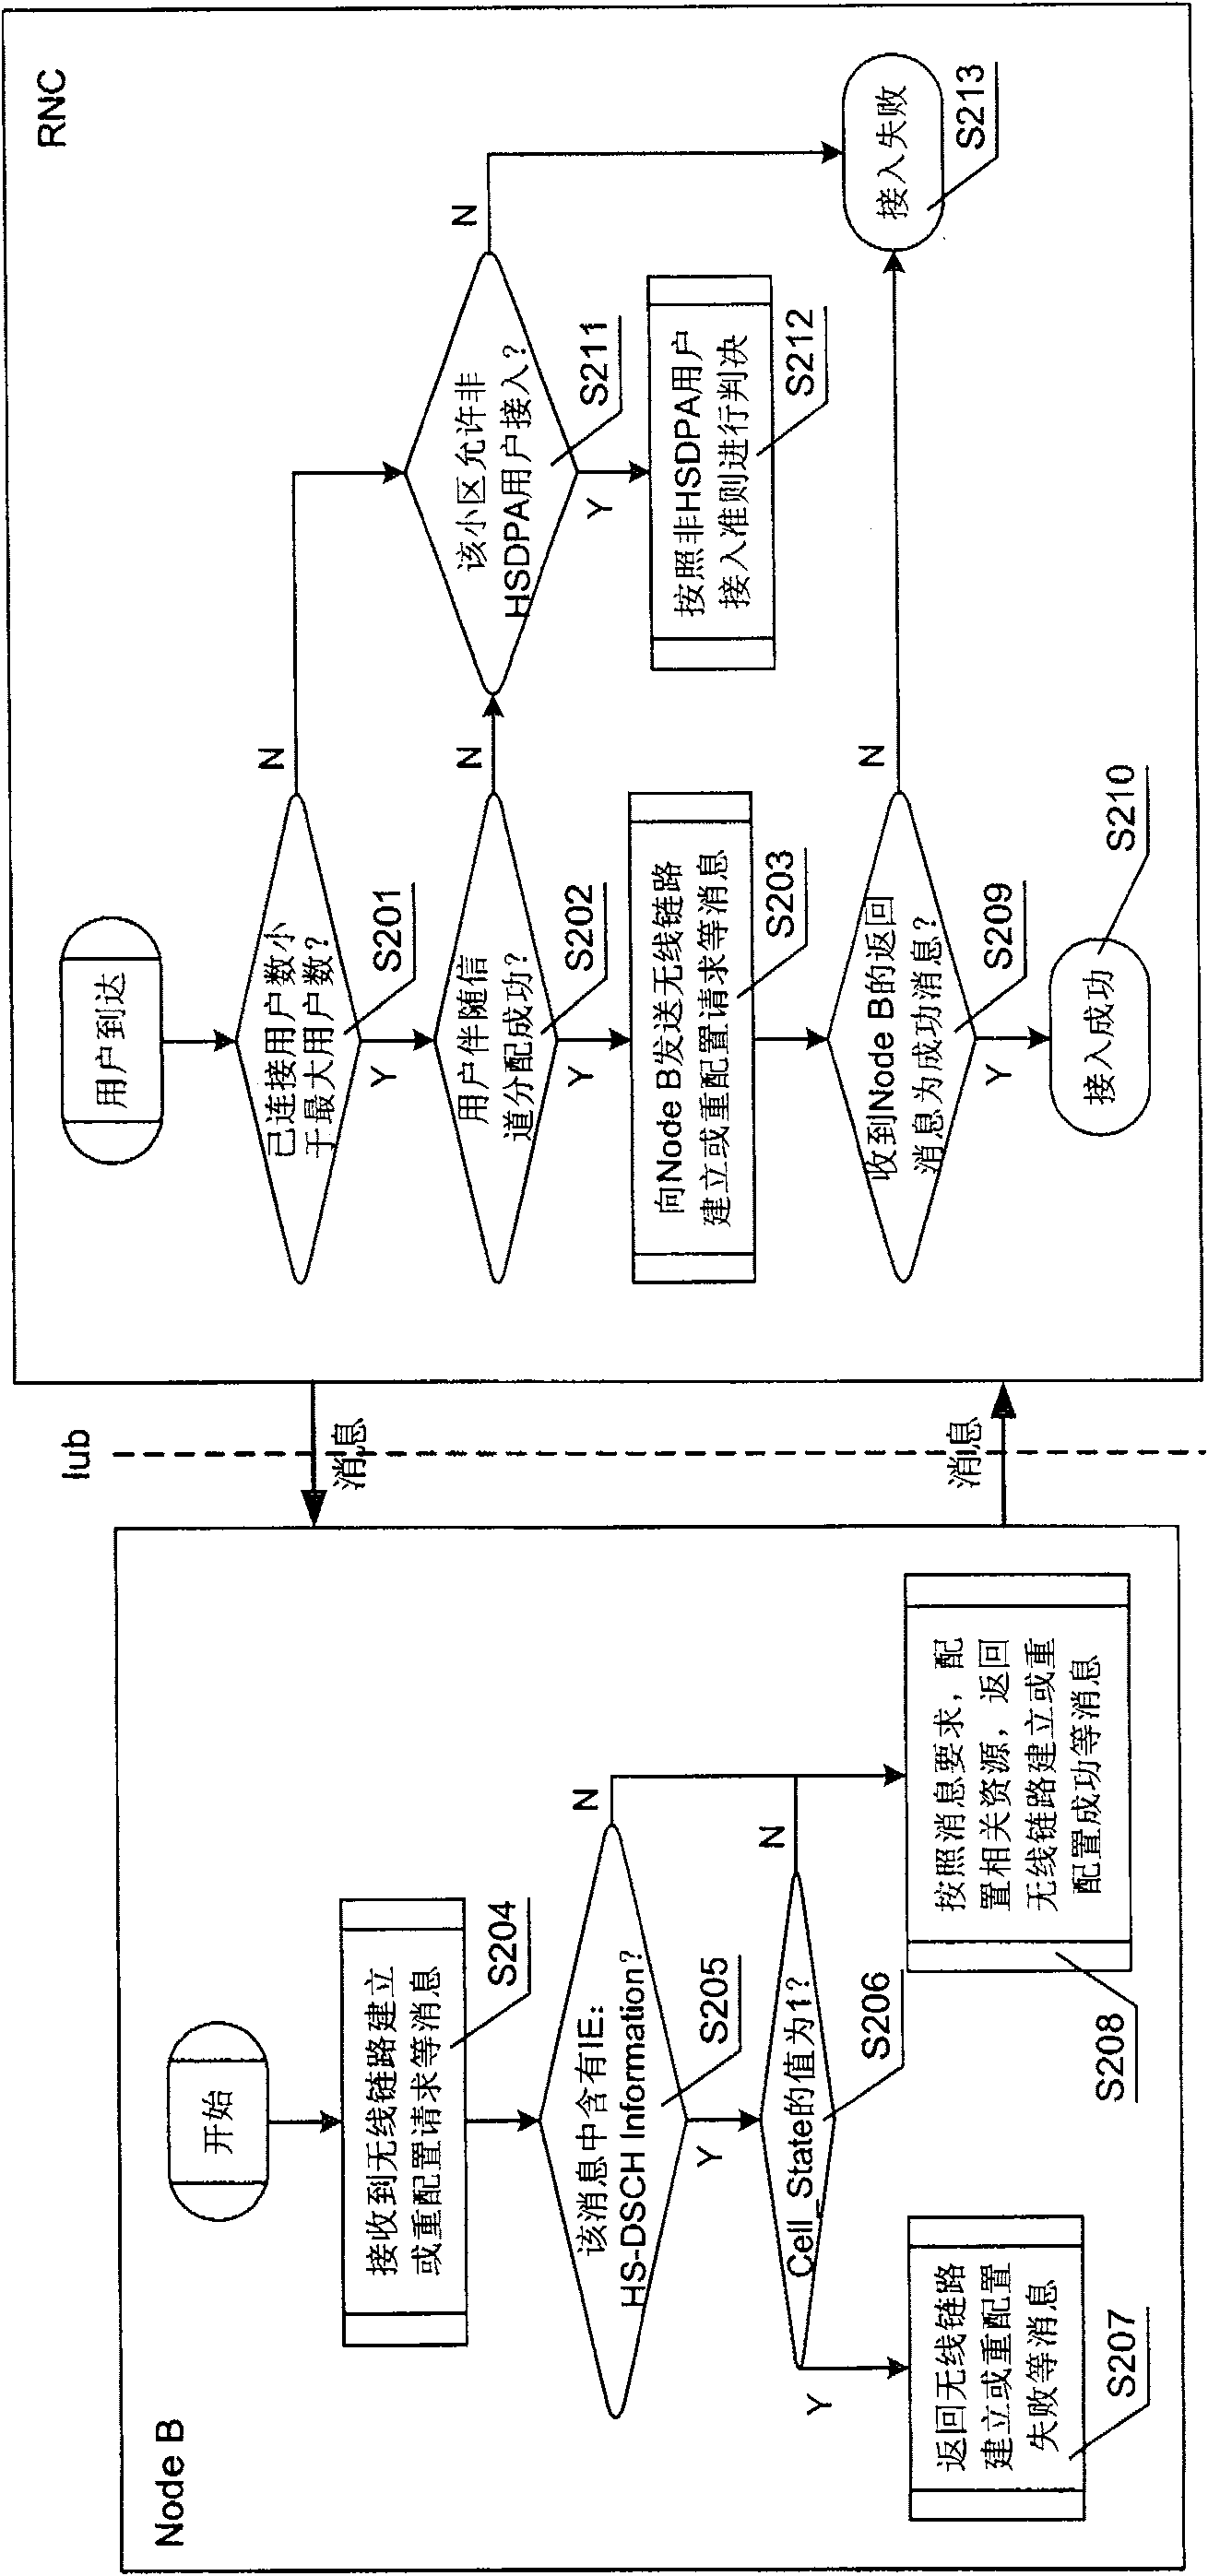 User access method and applied communication devices for high-speed downlink packet access system